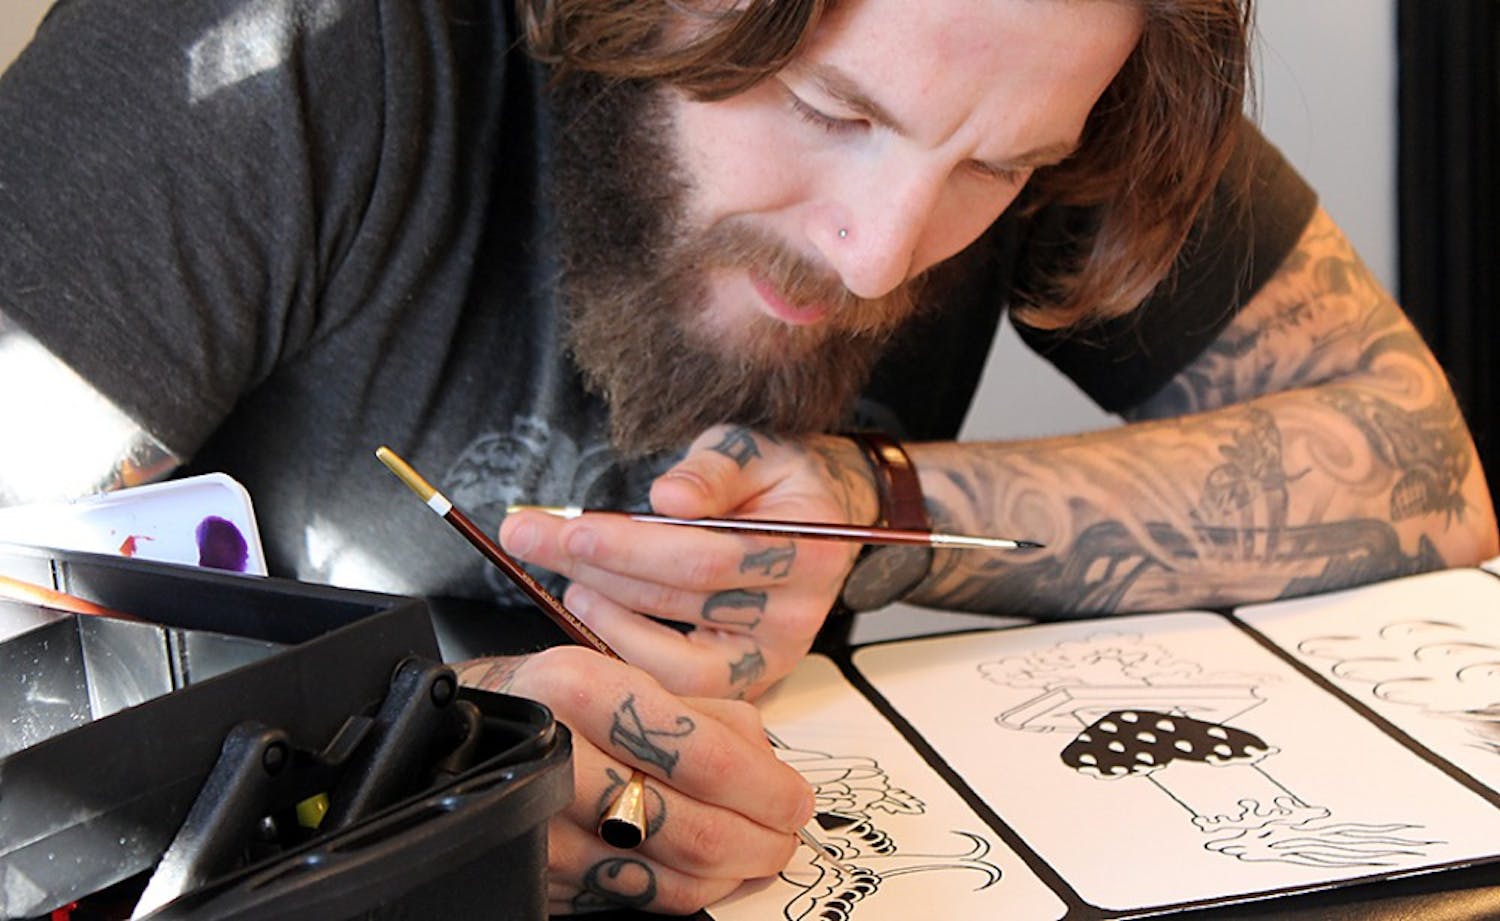 Get a history lesson and ink at the new Pittsburgh Tattoo Art